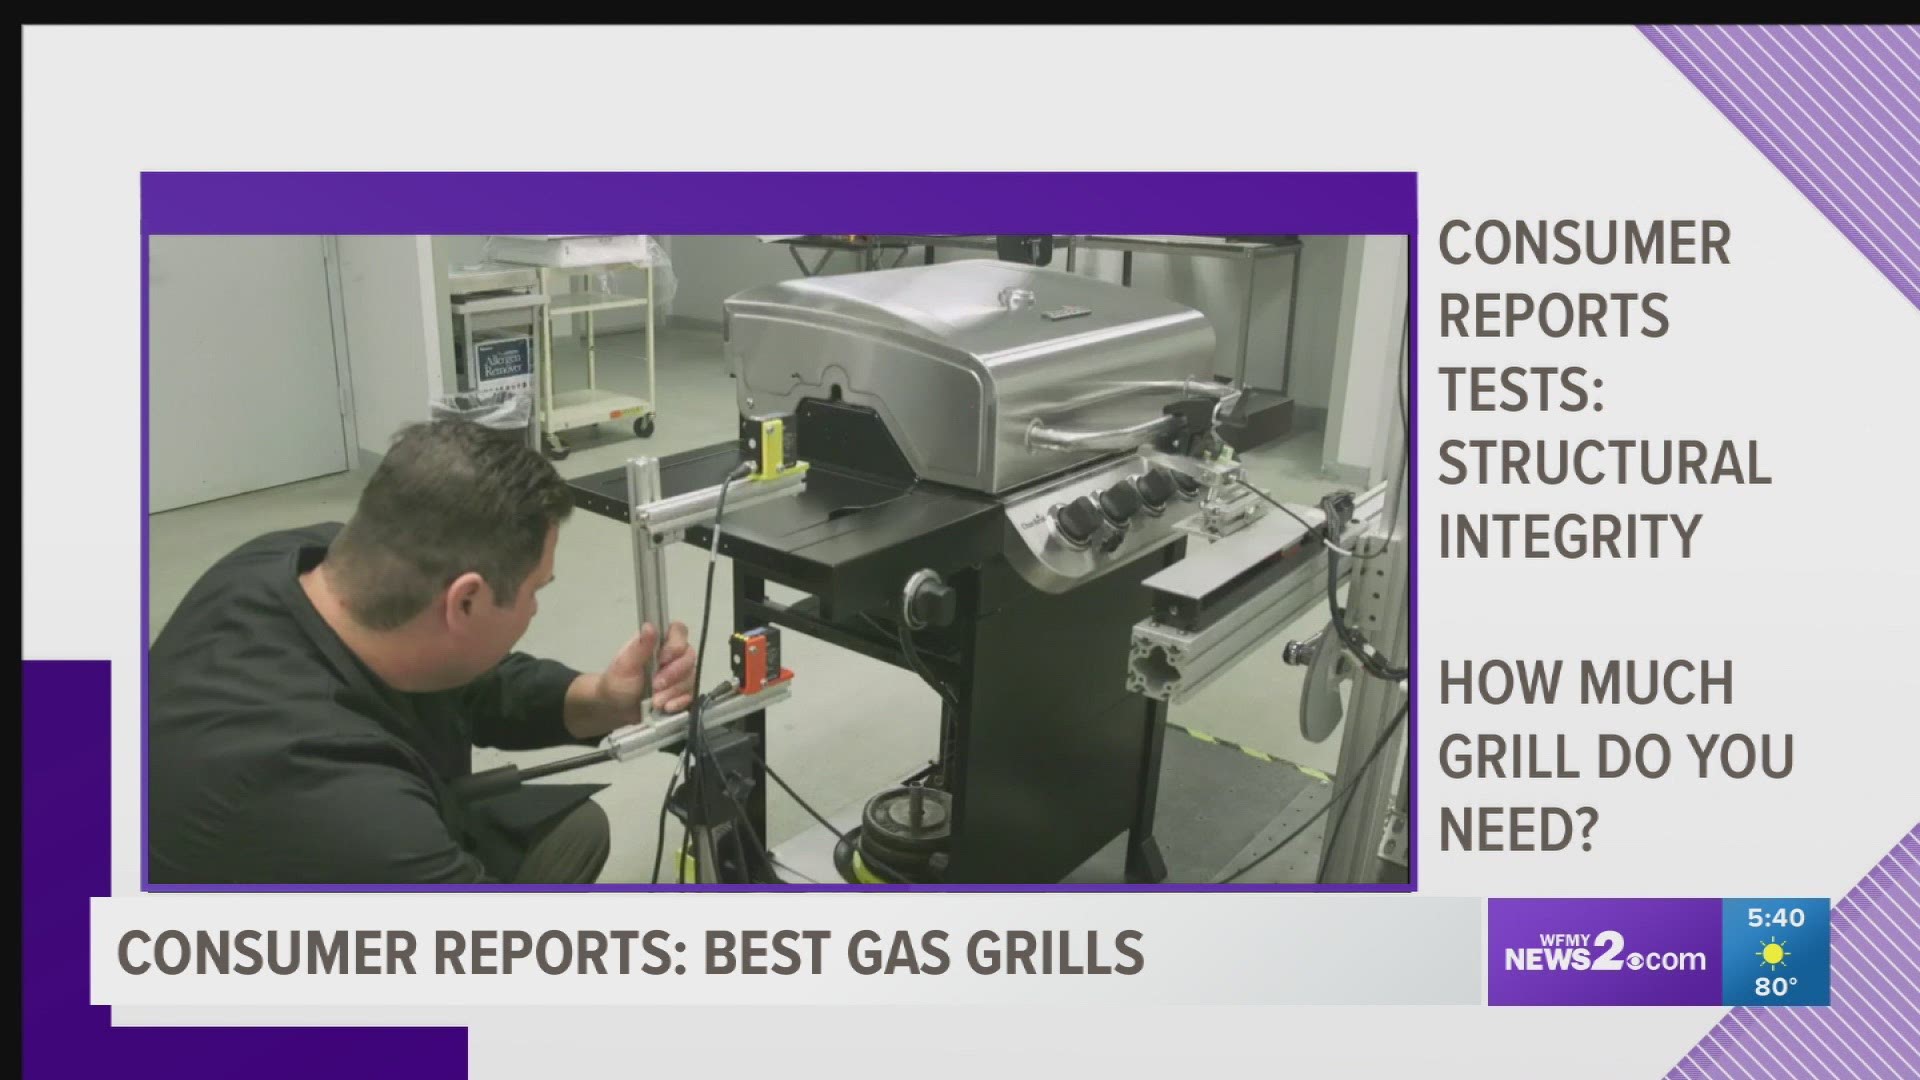 In the market for a gas grill? CR tested & came up with their top 3 in various price ranges.